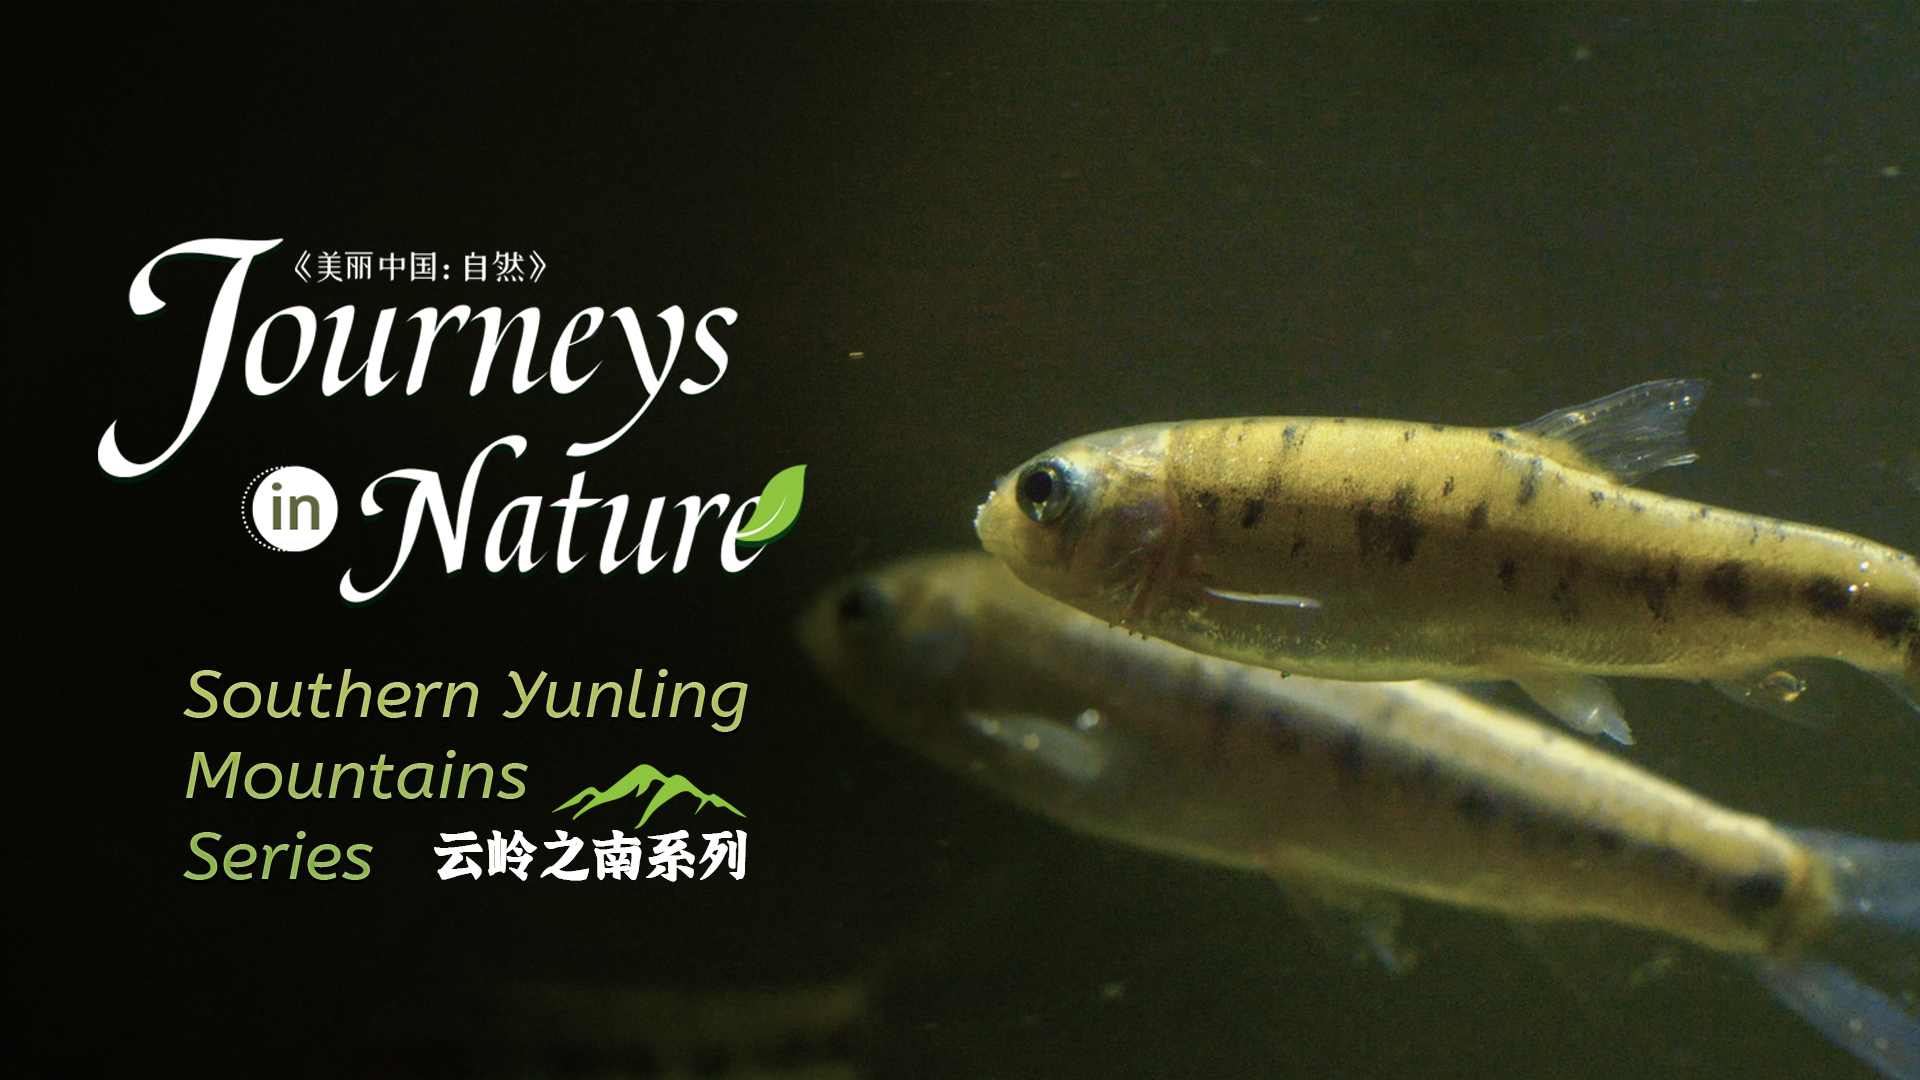 CGTN Nature to release 'Journeys in Nature: Southern Yunling Mountains Series'